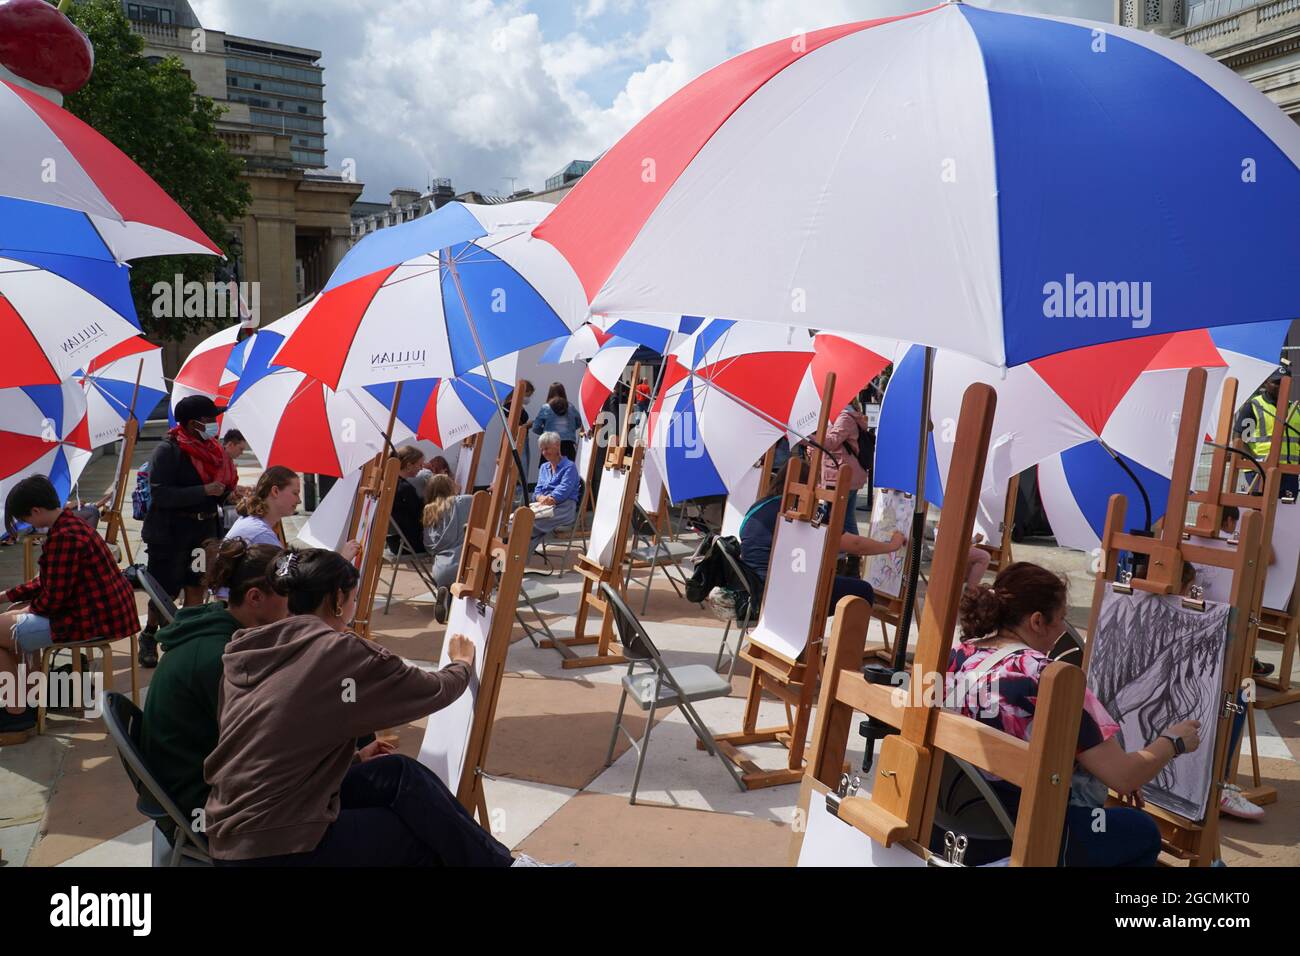 London, UK, 9 August 2021: The National Gallery offers art classes in Trafalgar Square as part of the Inside Out Festival throughout August. Thirty easels have been set up -- with umbrellas for the erratic summer weather -- and people of all ages can drop in to Sketch on the Square for guidance in drawing skills. Anna Watson/Alamy Live News Stock Photo